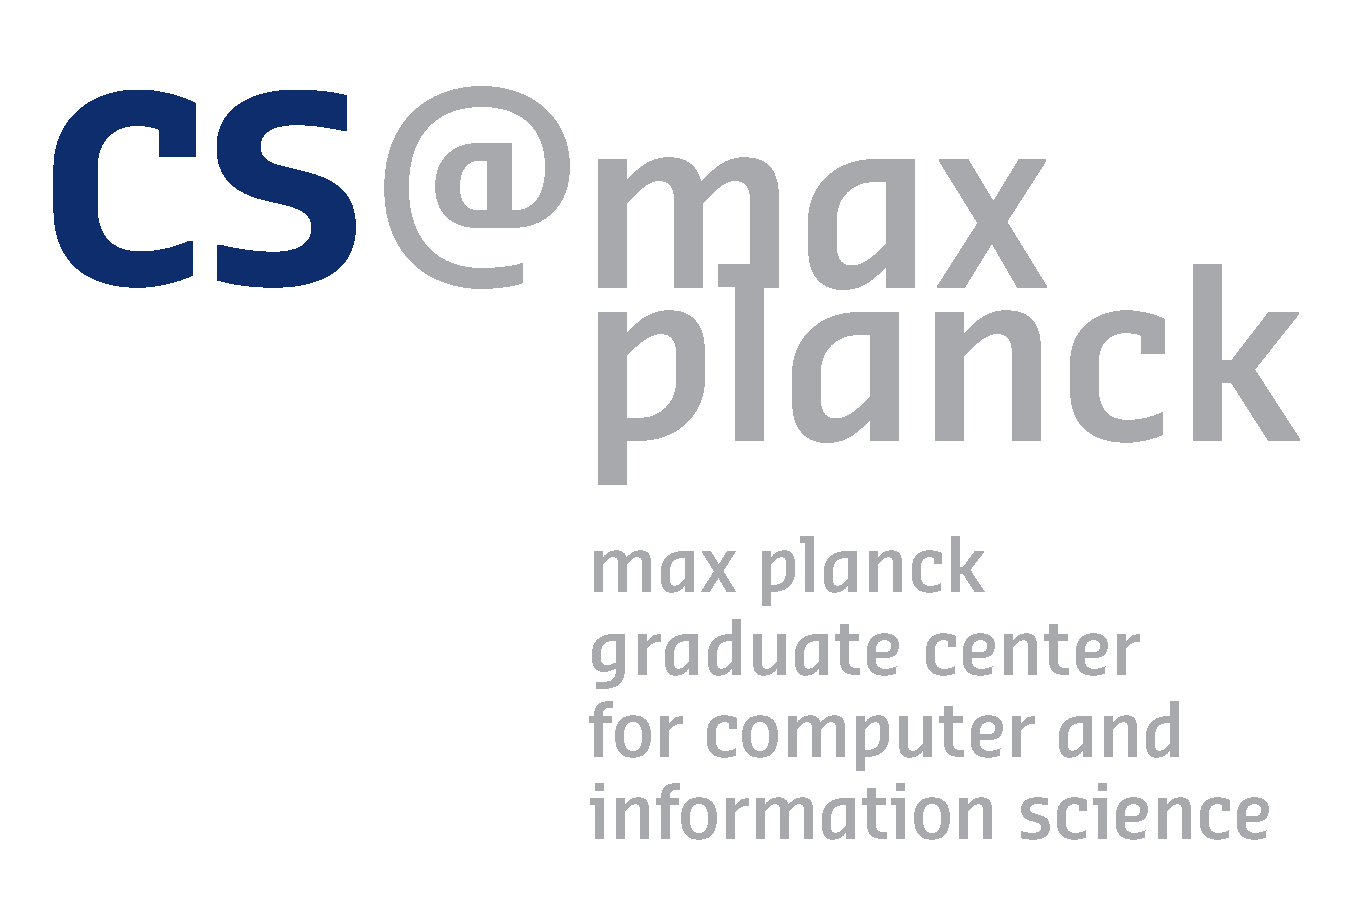 phd positions in germany computer science